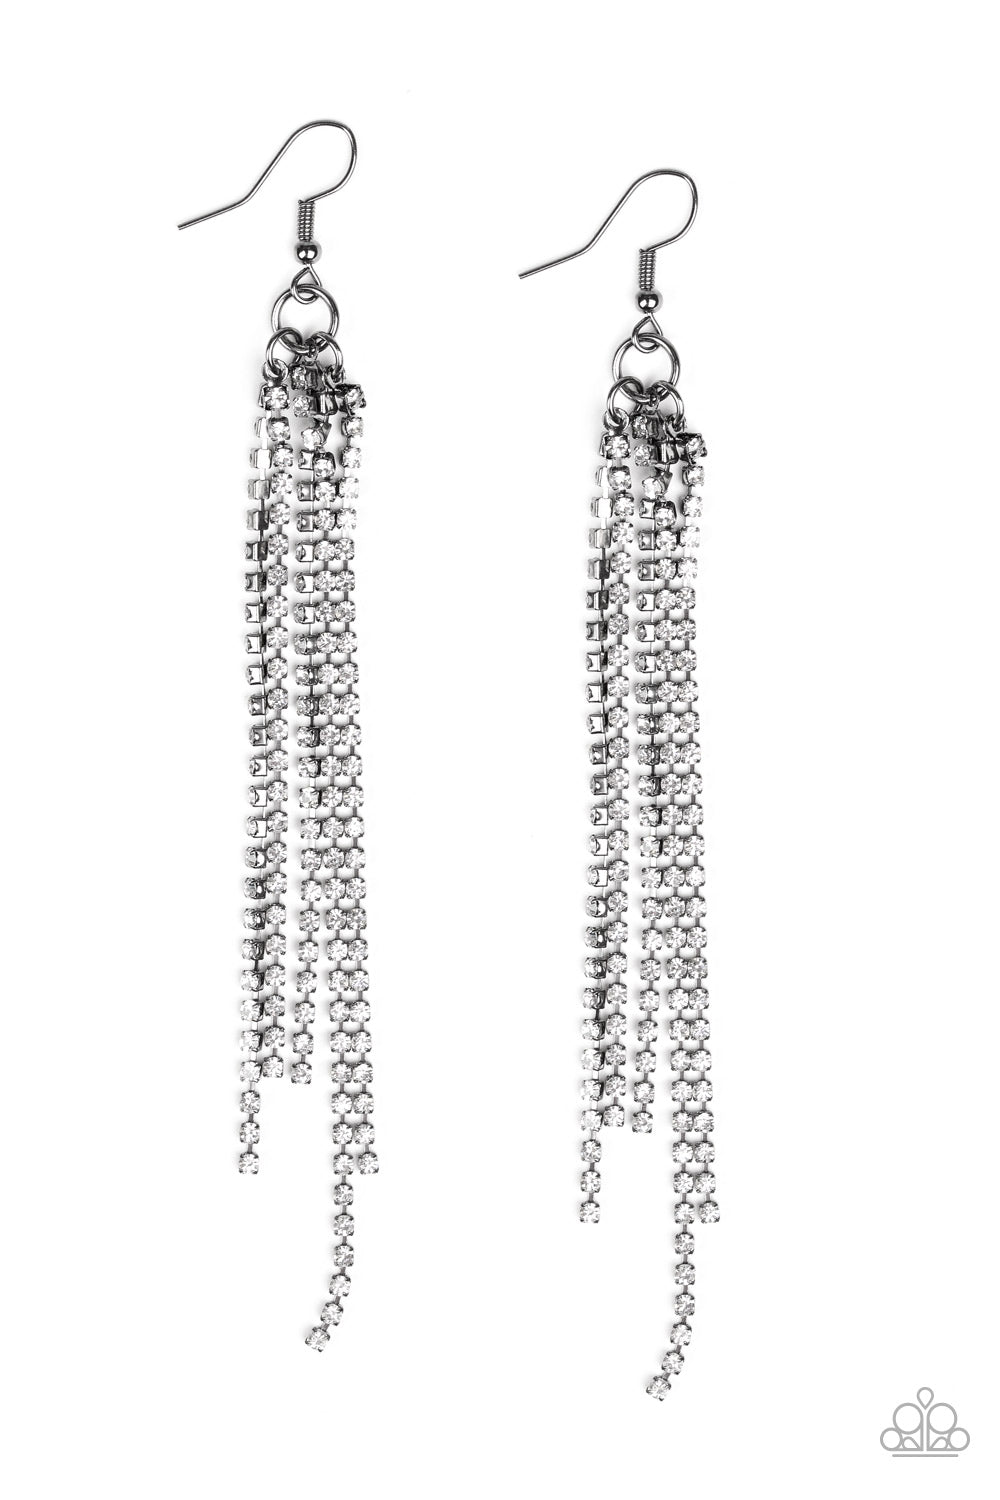 Center Stage Status - Black Item #E174 Featuring sleek square fittings, strands of glittery white rhinestones freefall from the ear, creating a glamorous fringe. Earring attaches to a standard fishhook fitting. All Paparazzi Accessories are lead free and nickel free!  Sold as one pair of earrings.